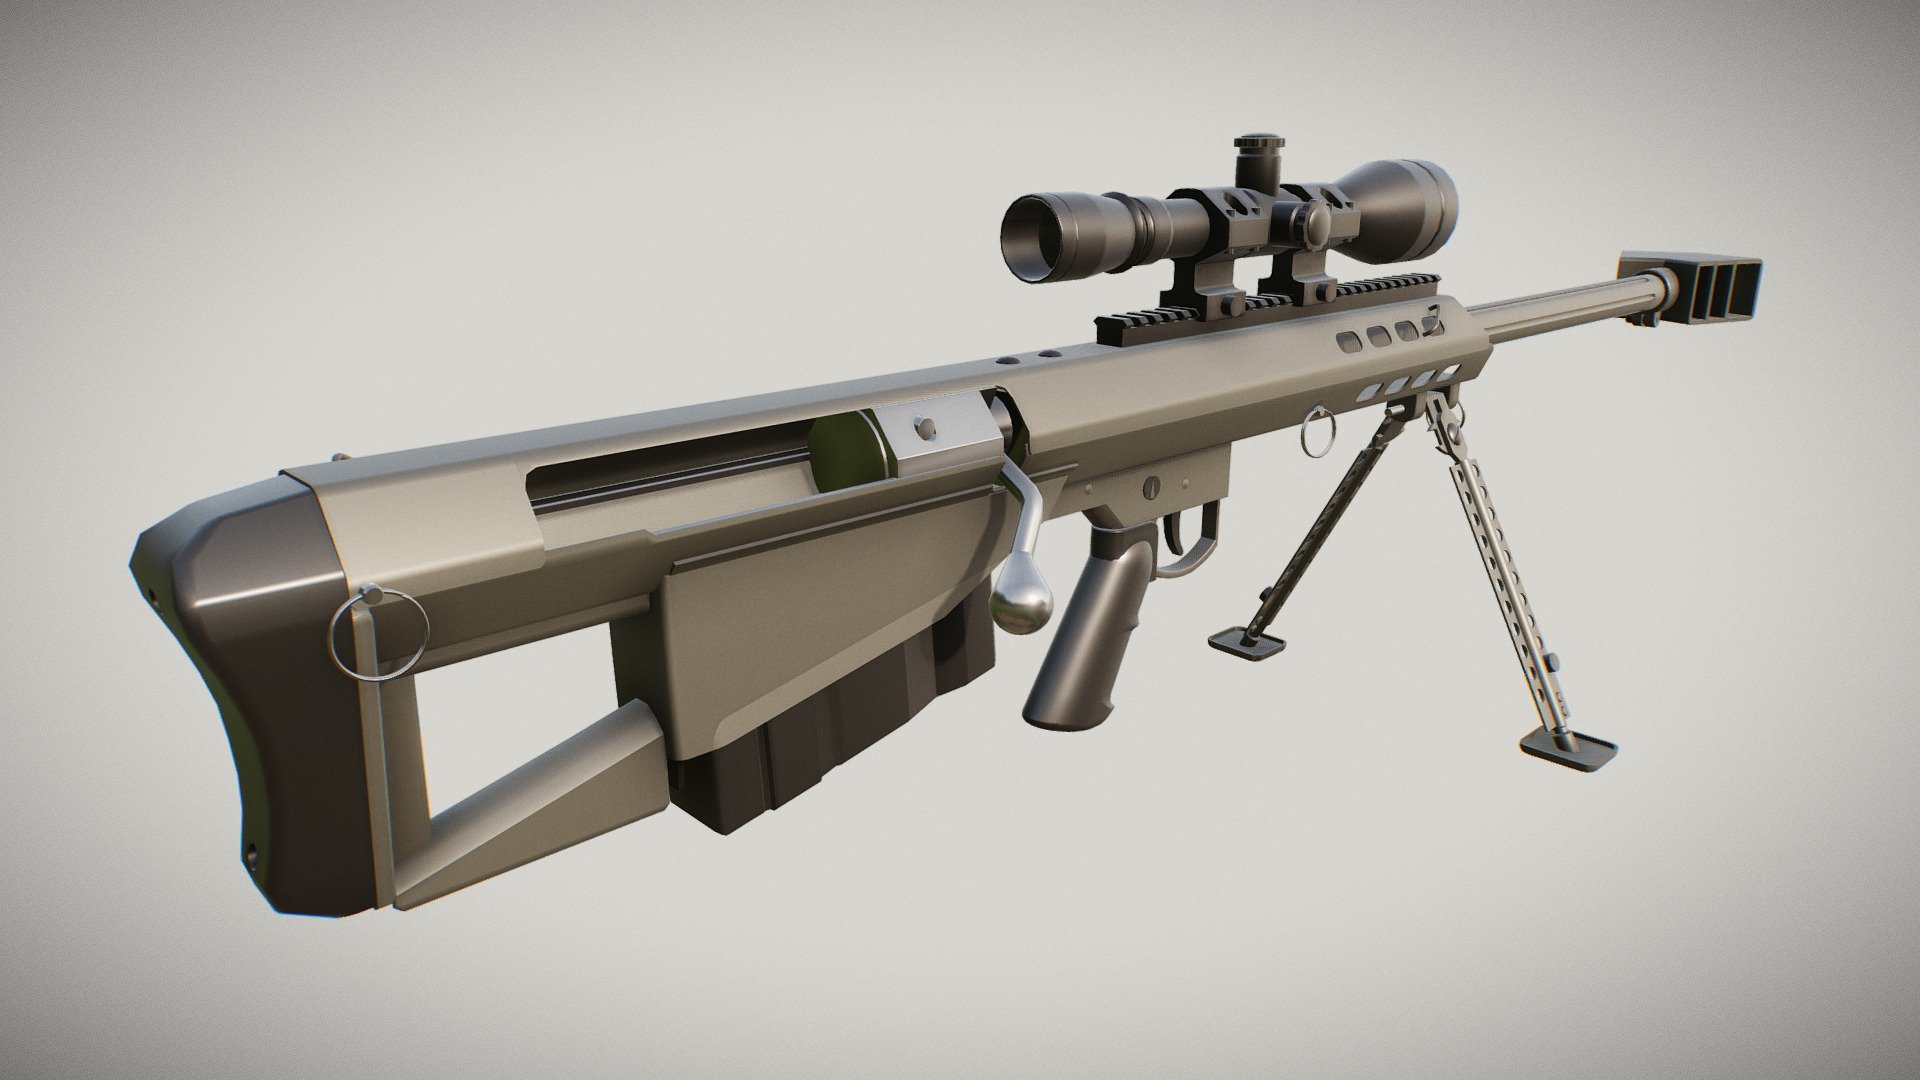 Revamp of M95 model in black with scope. This model is not optimized for use in games 3d model